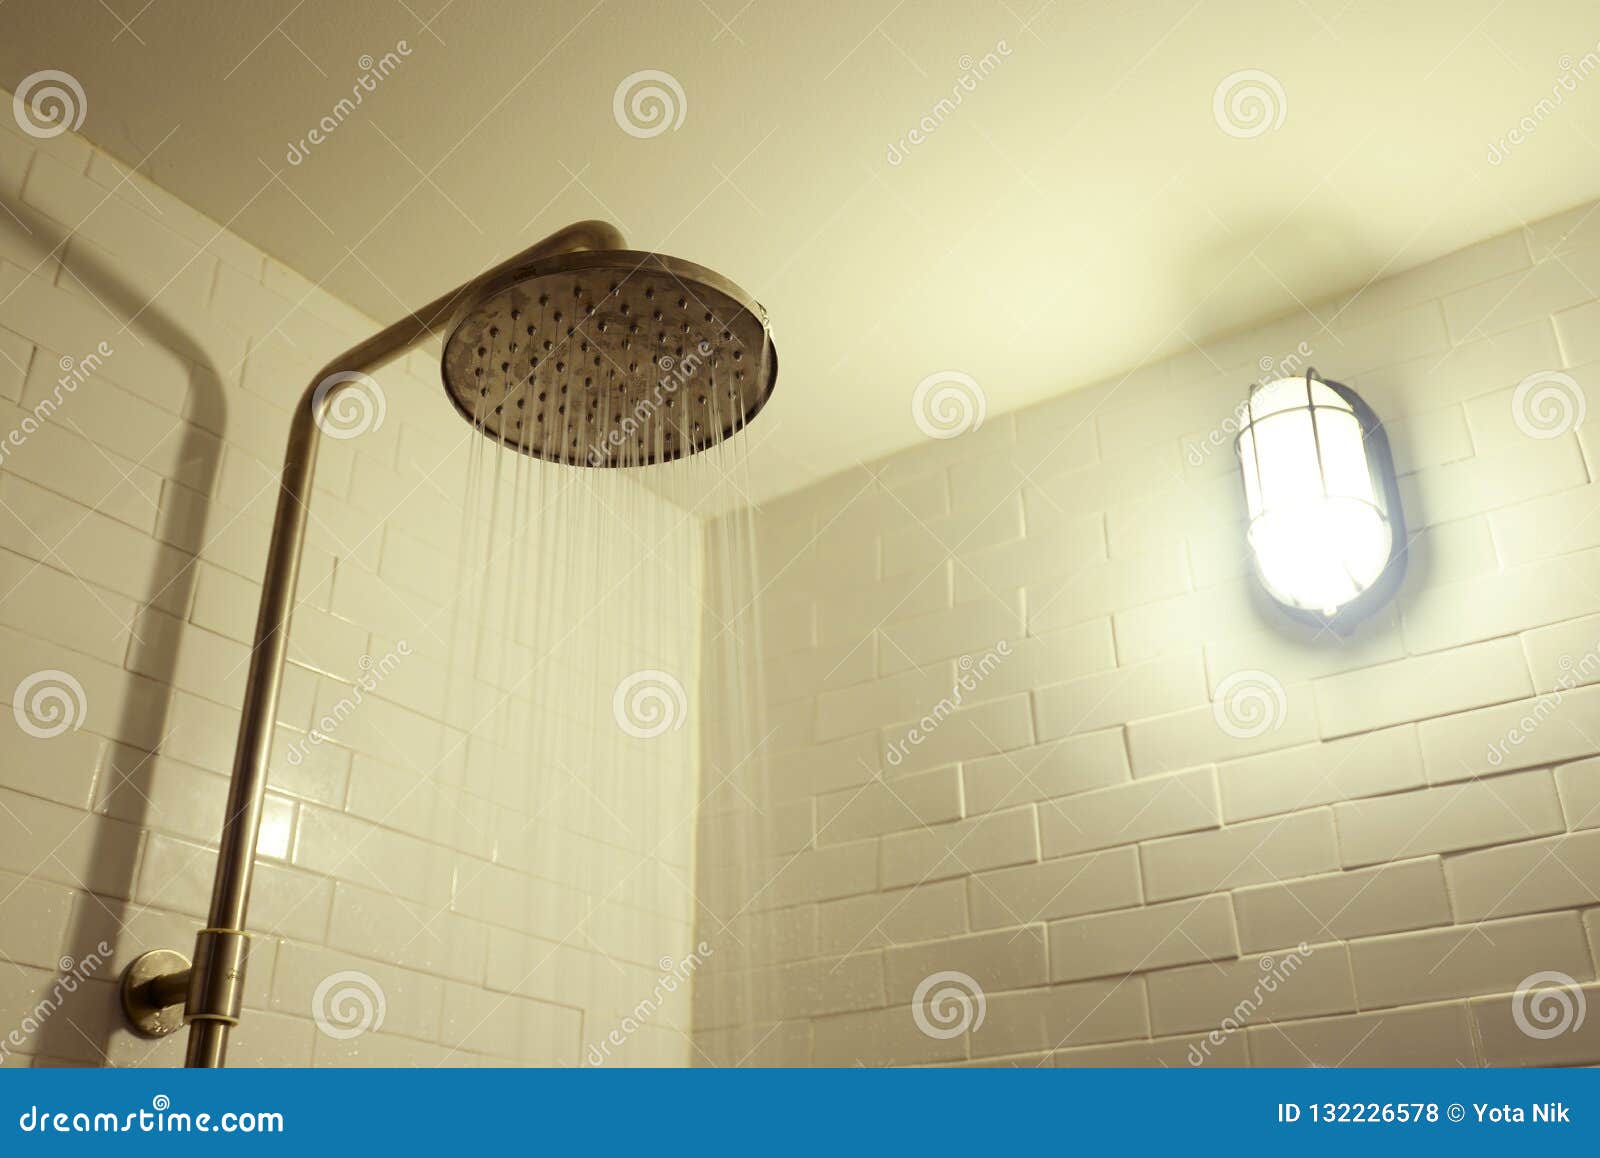 Bathroom Shower Place Interior With Water Leaking And Light